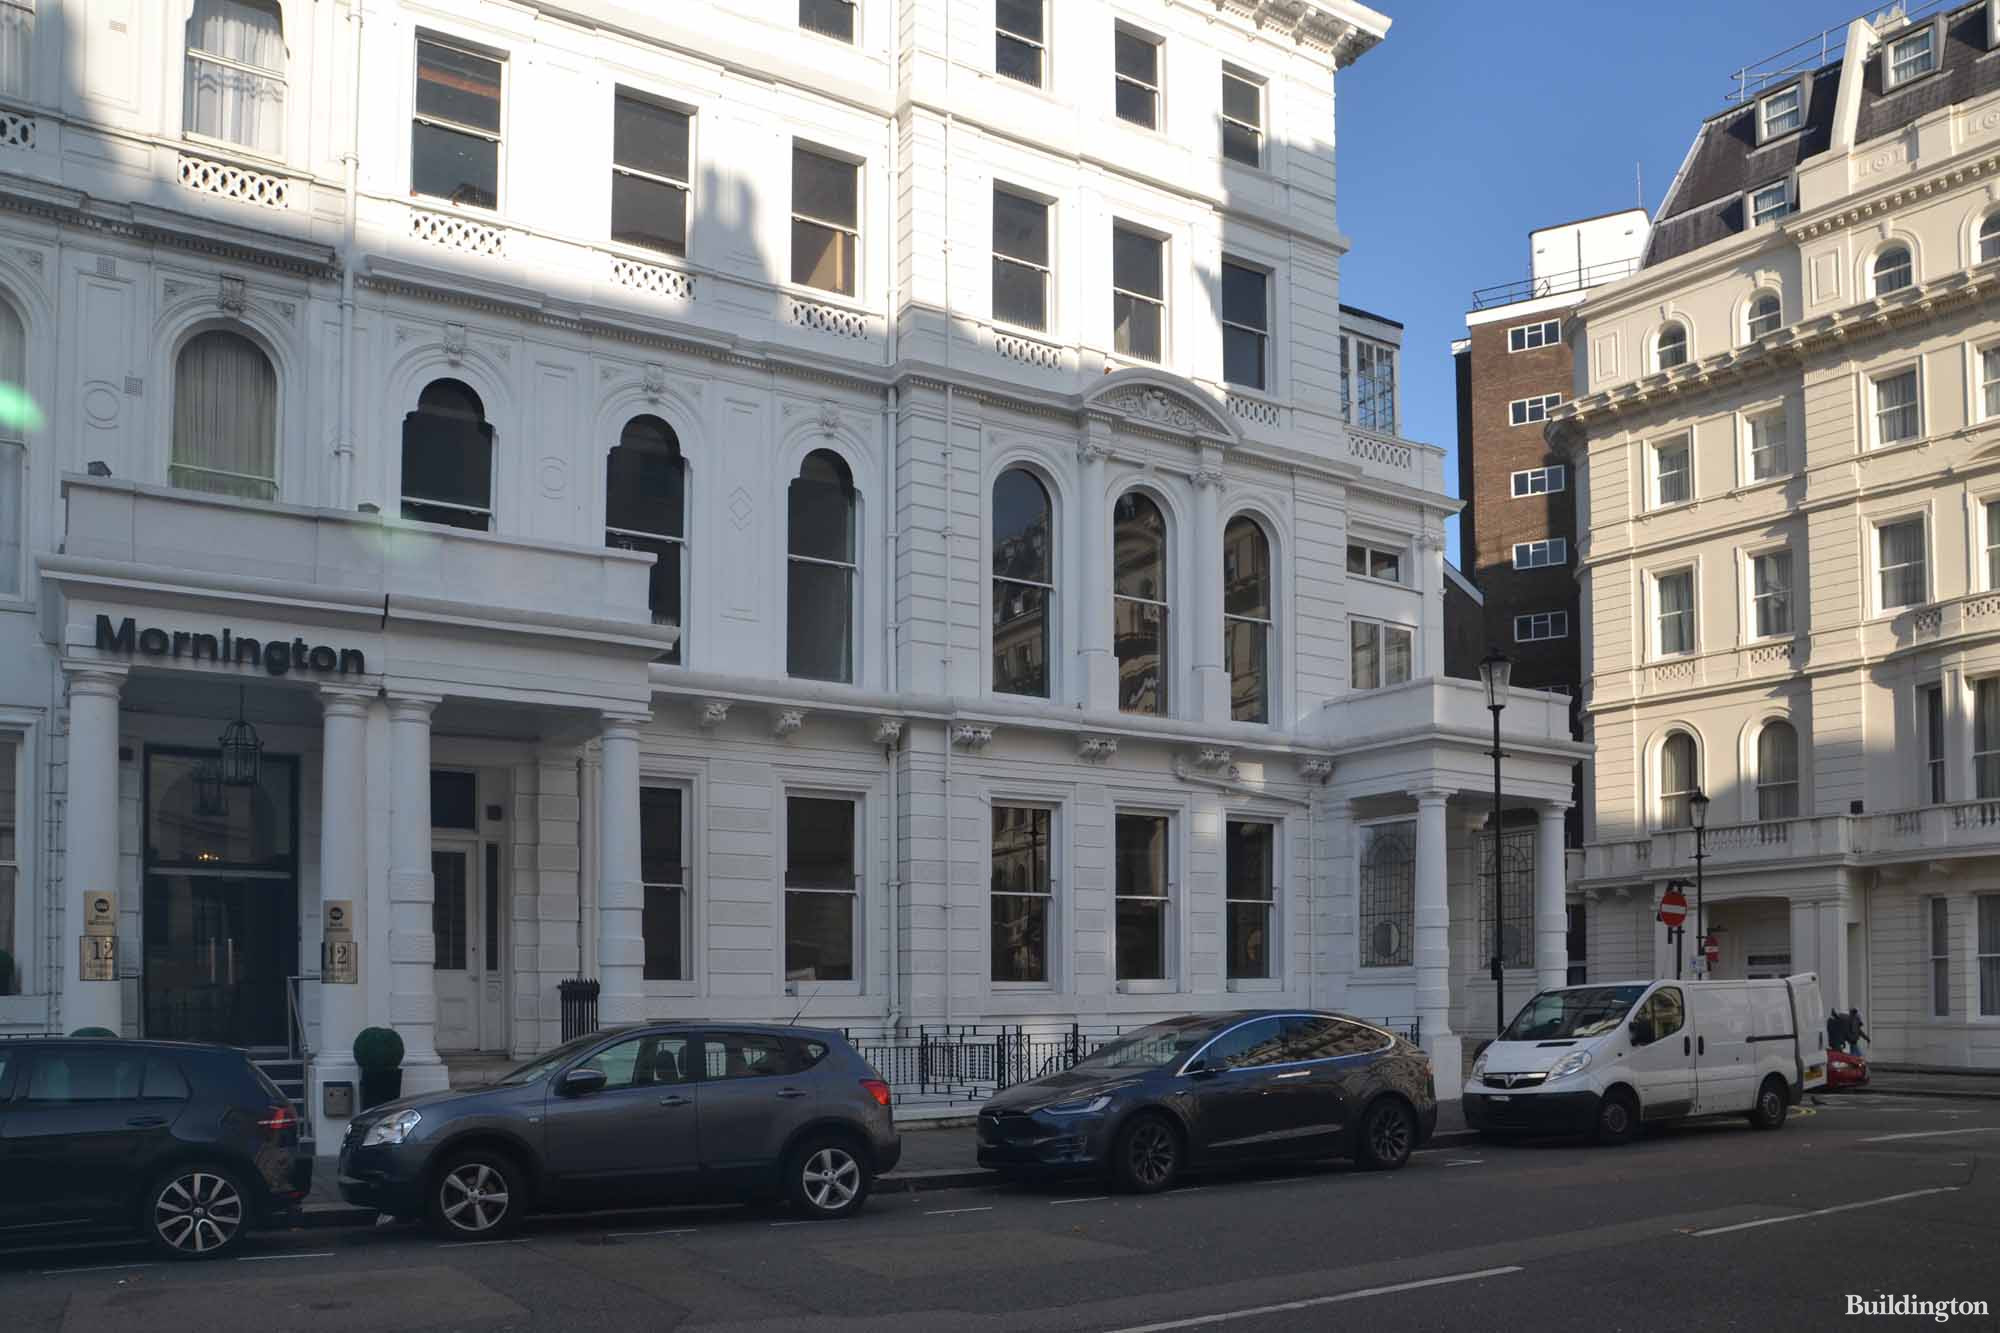 10-11 Lancaster Gate building in Bayswater, London W2